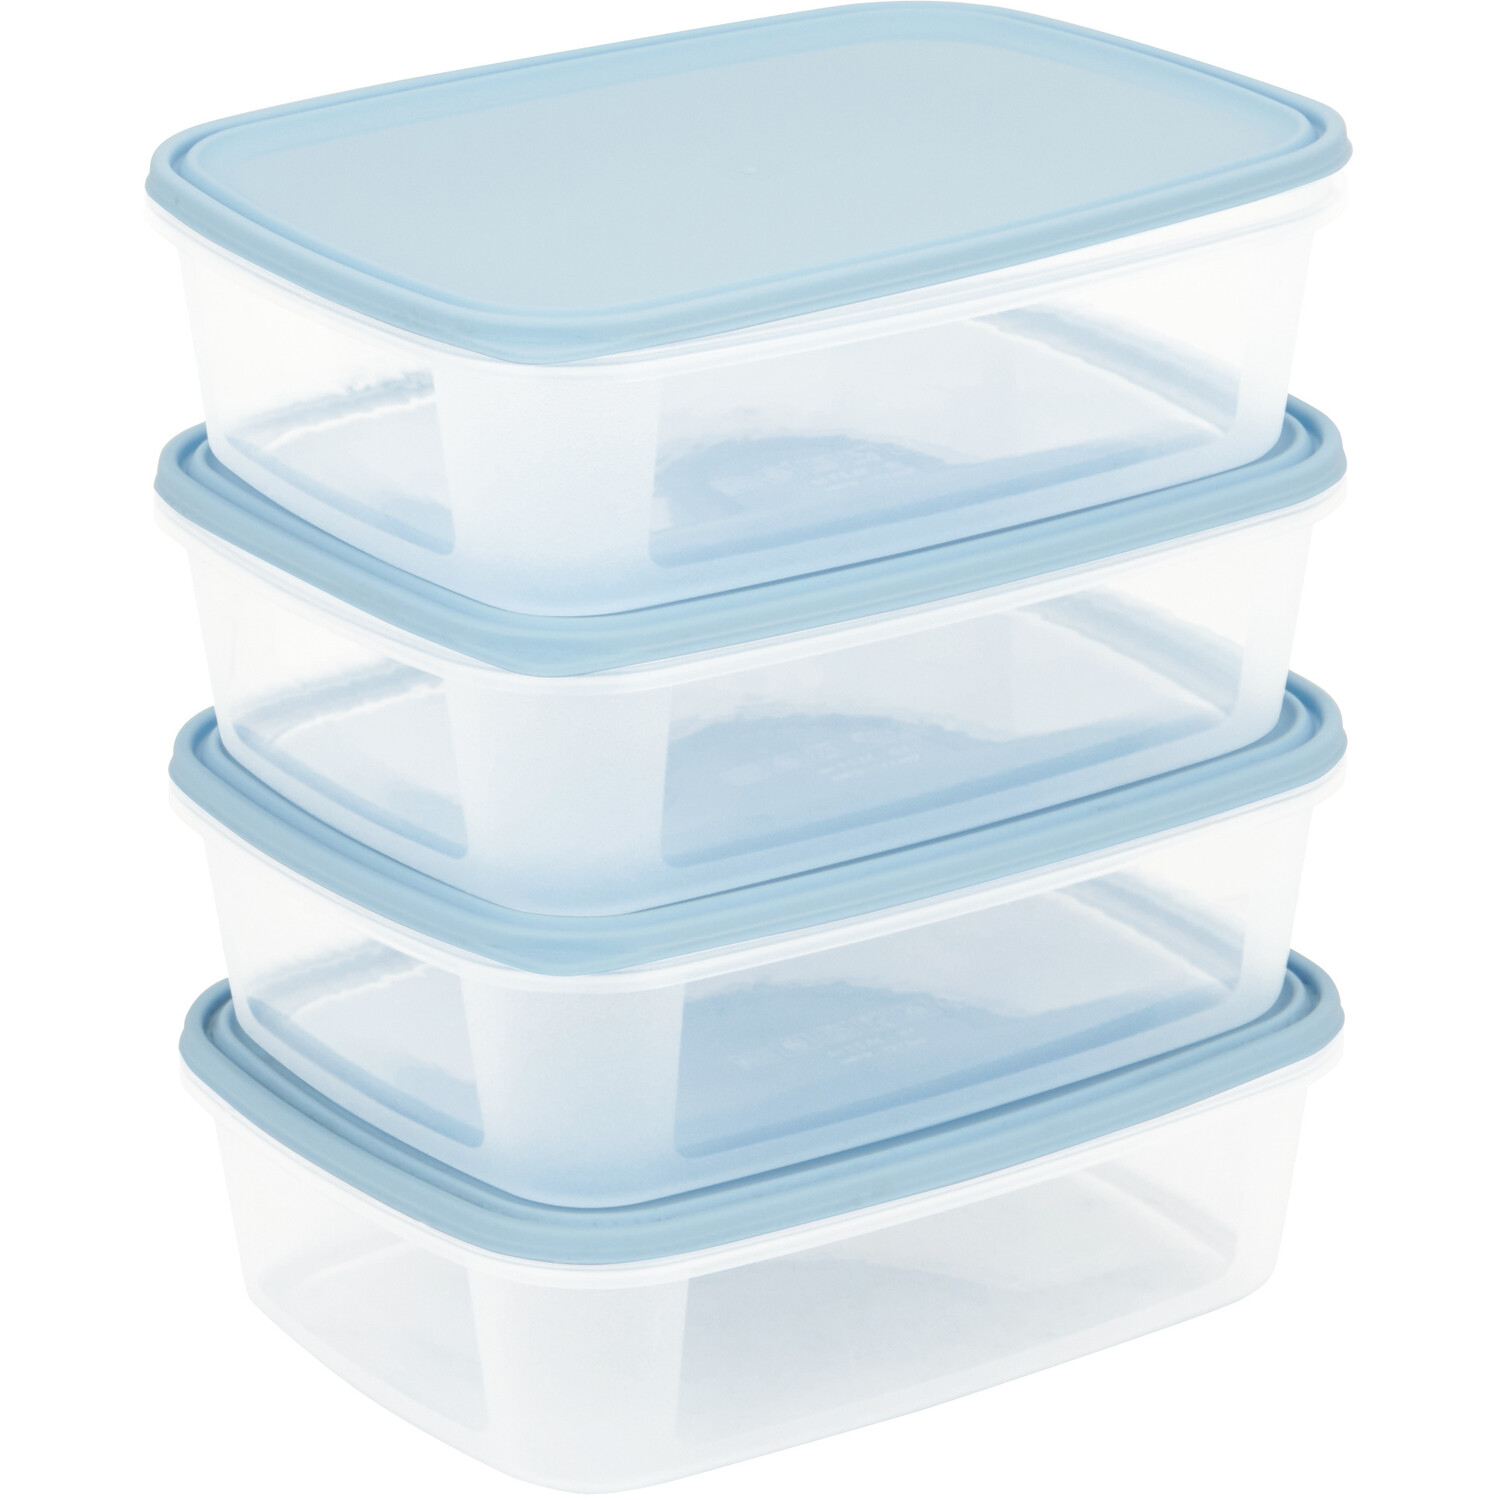 Set of 4 Everyday Food Boxes - Clear Image 2